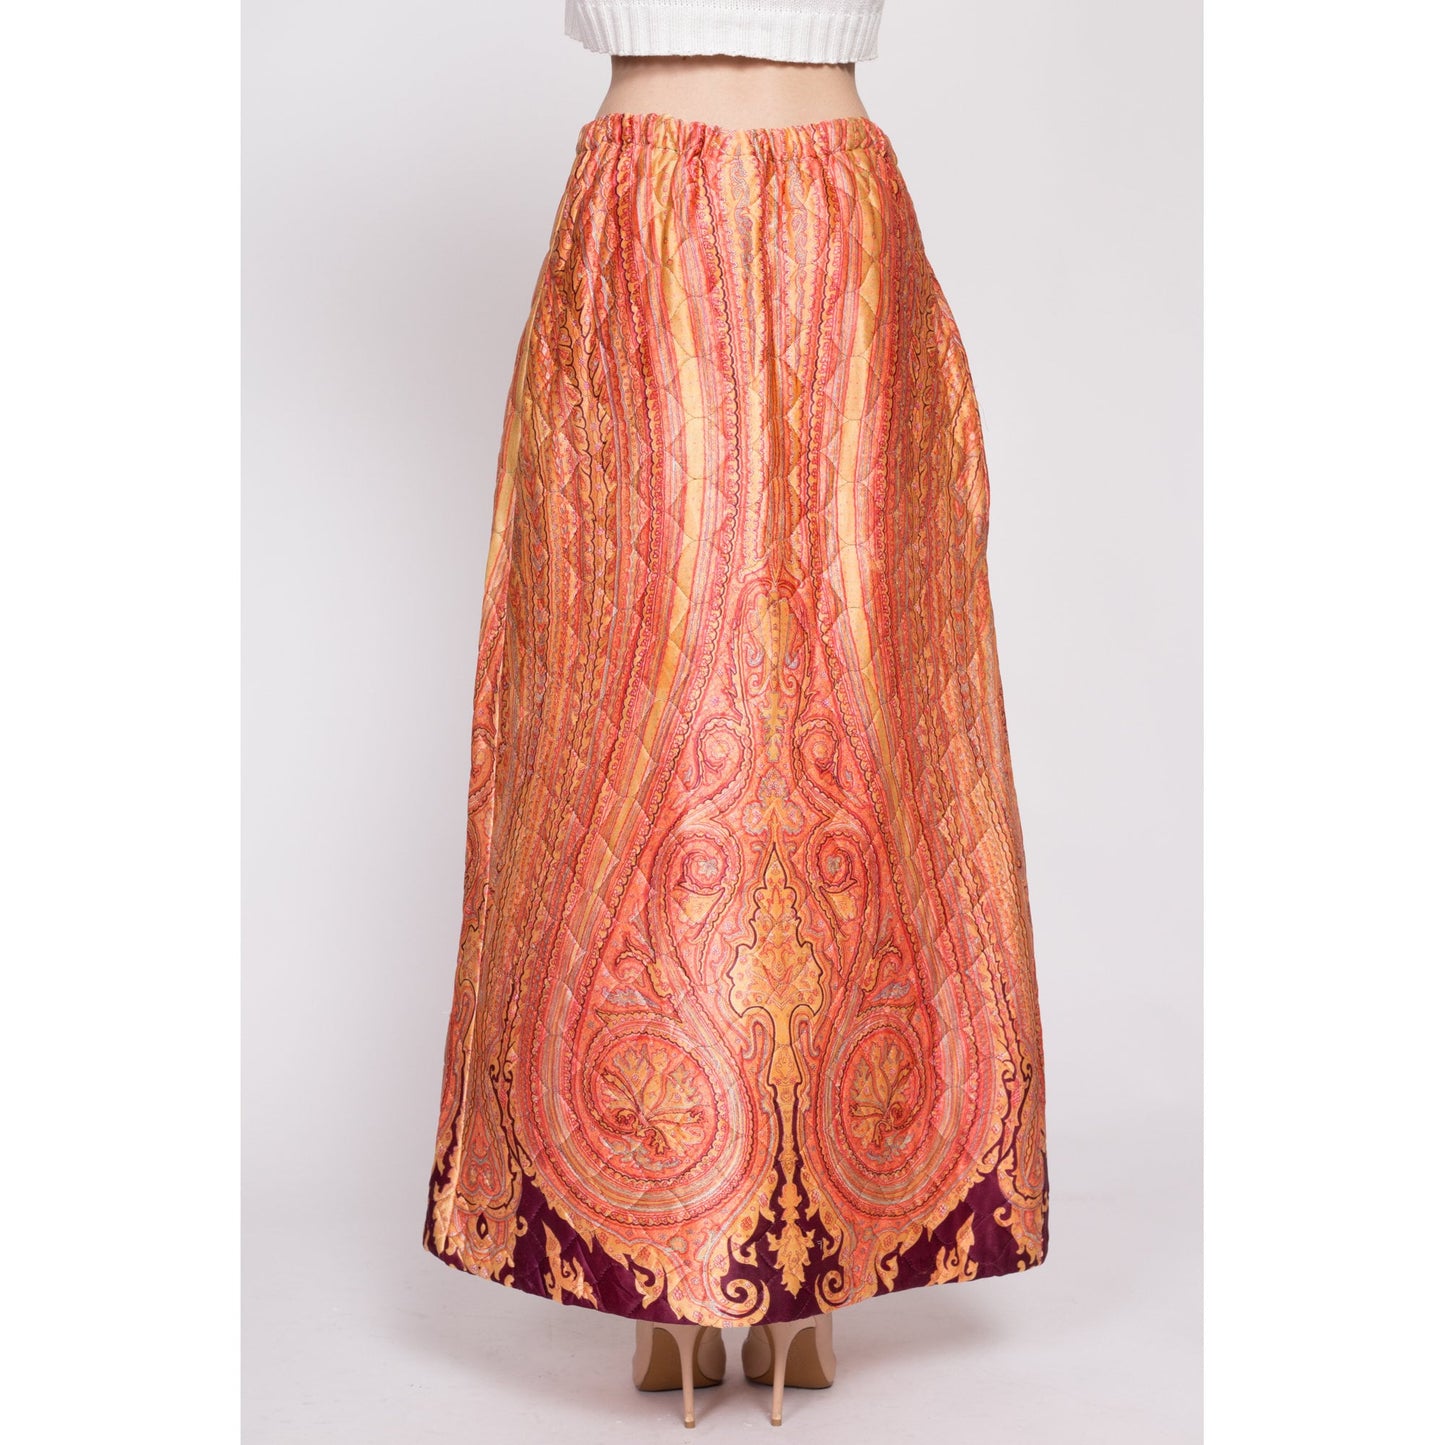 70s Psychedelic Quilted Paisley Satin Maxi Skirt - Medium to Large | Vintage Boho High Waisted A Line Button Up Skirt